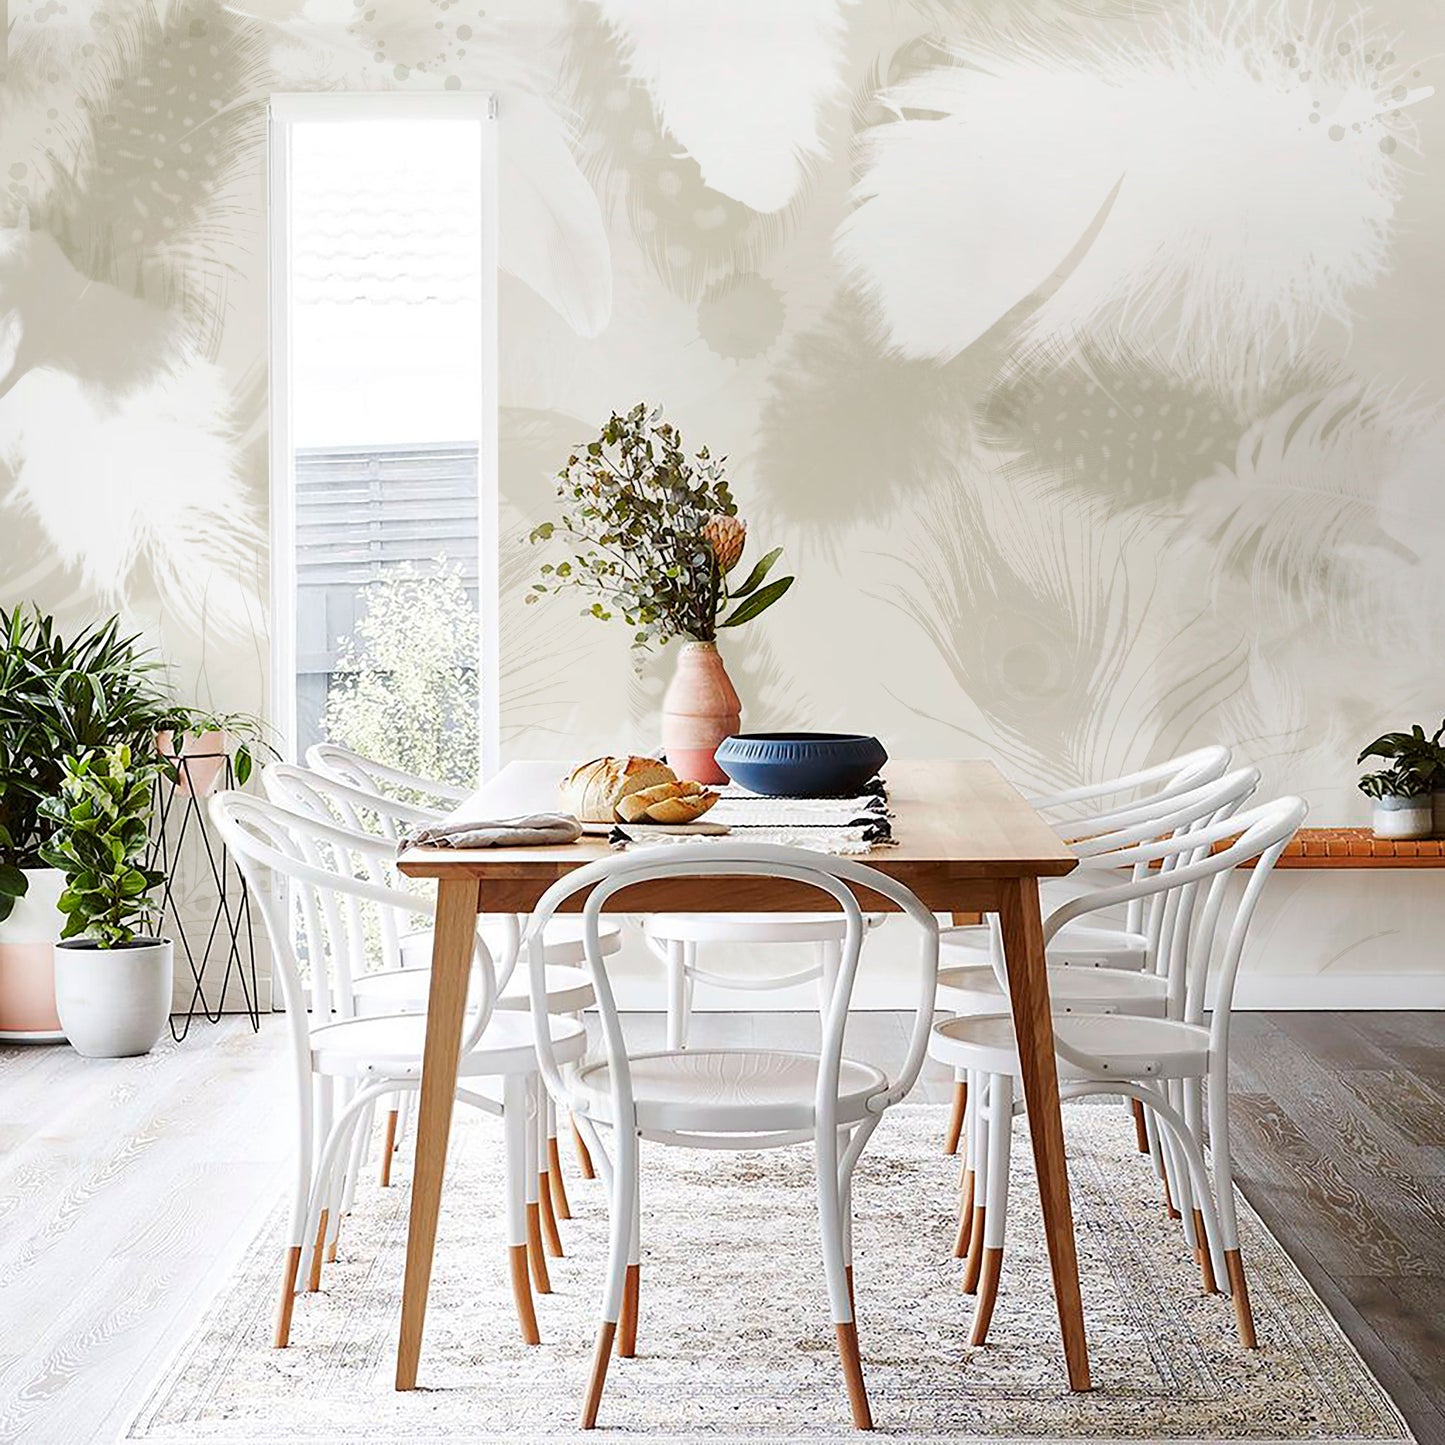 FEATHERS Wallpaper Mural